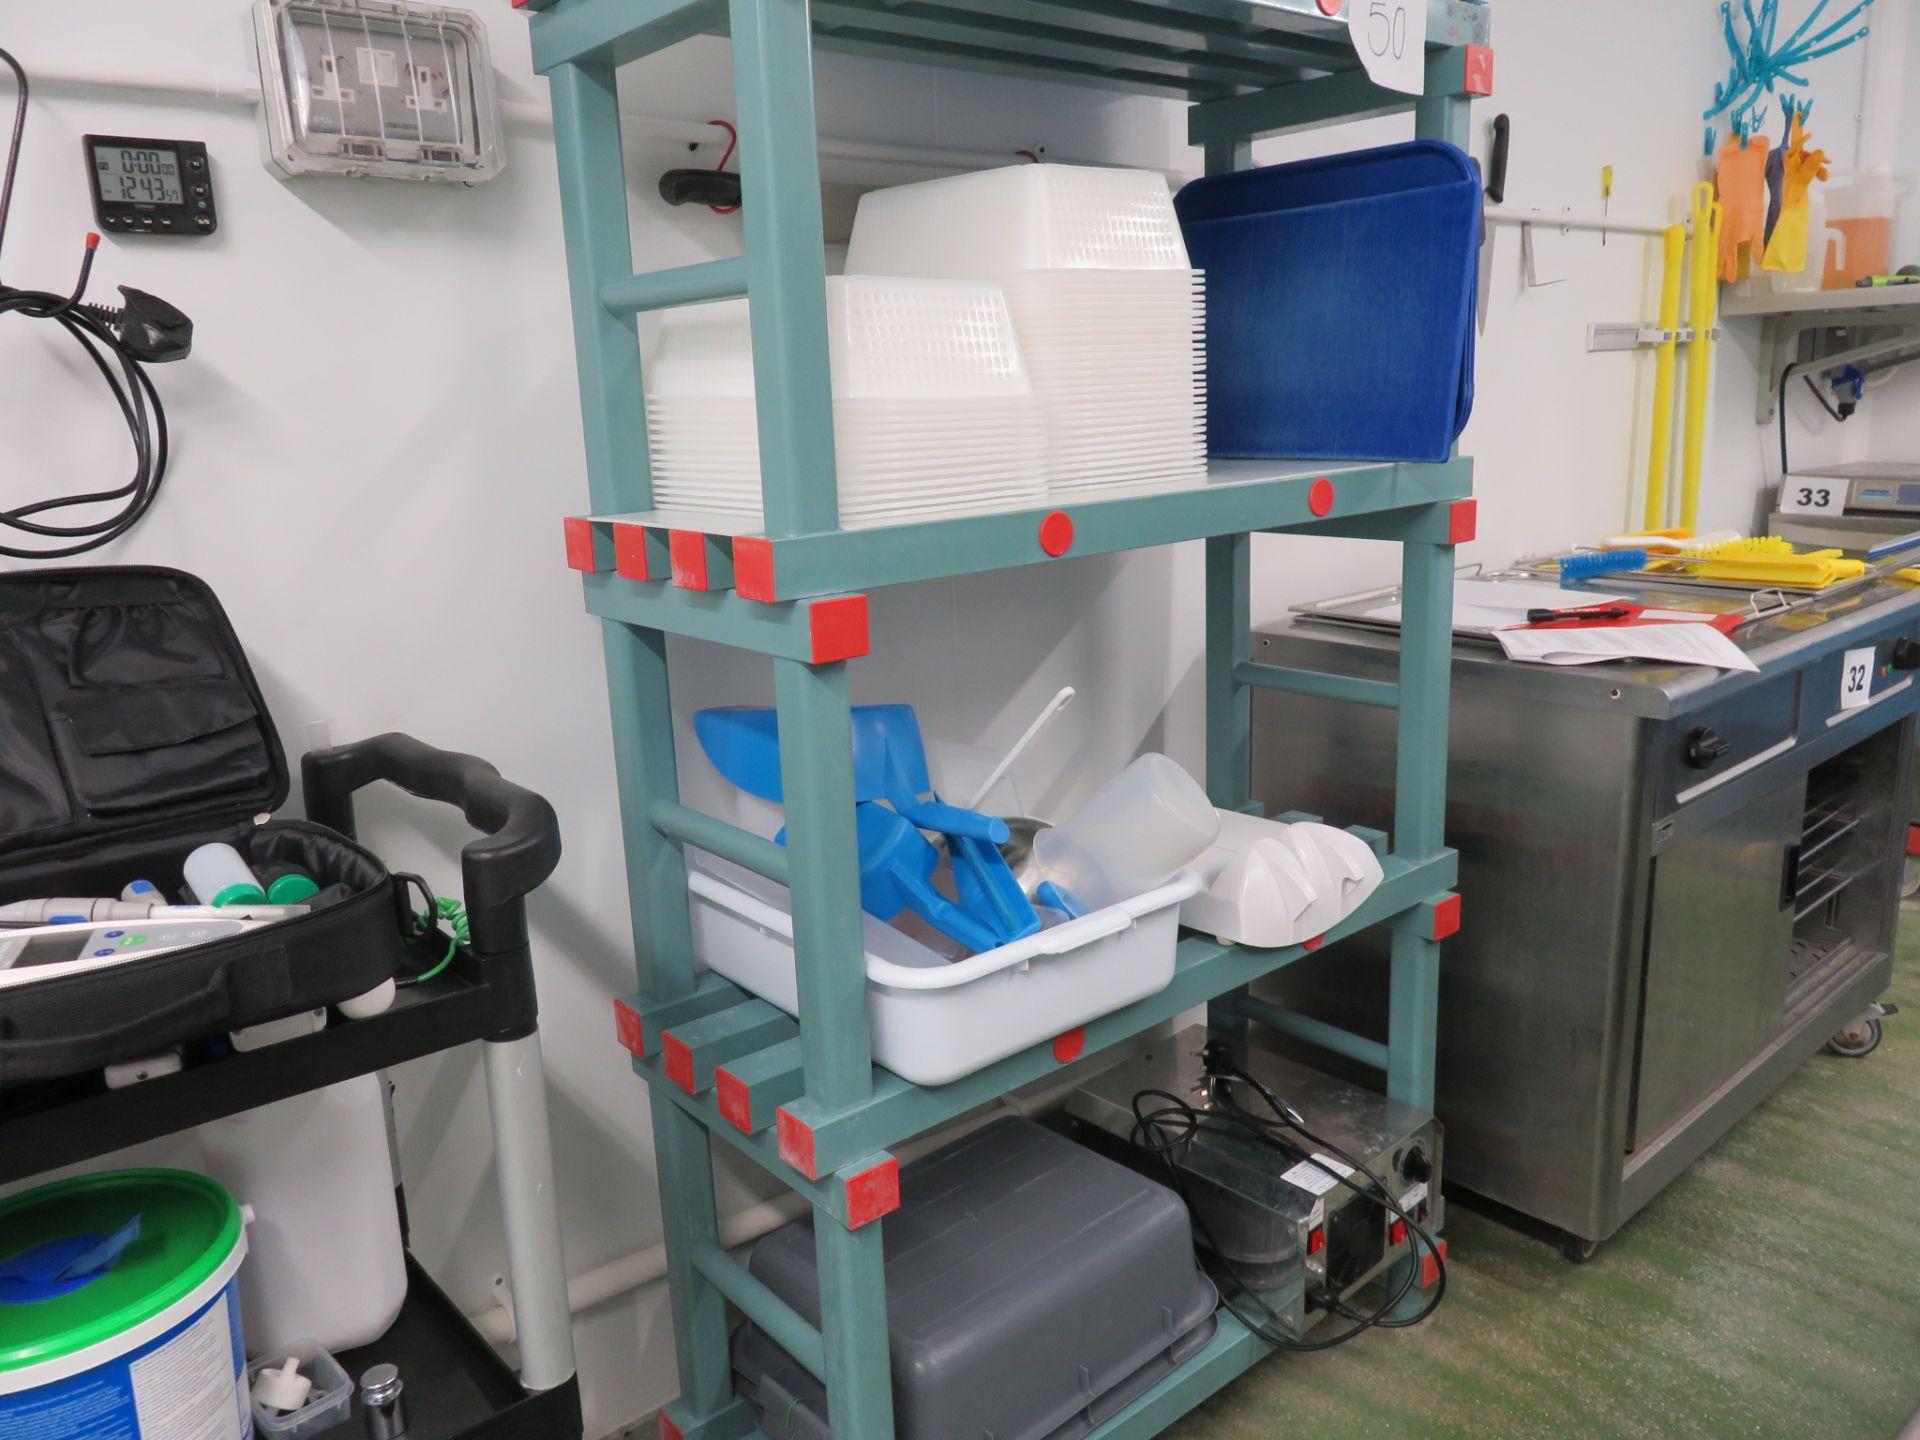 1 x Mobile trolley with 3-shelves and 1 x Shelf with 4-shelves. LO £30. - Image 3 of 3